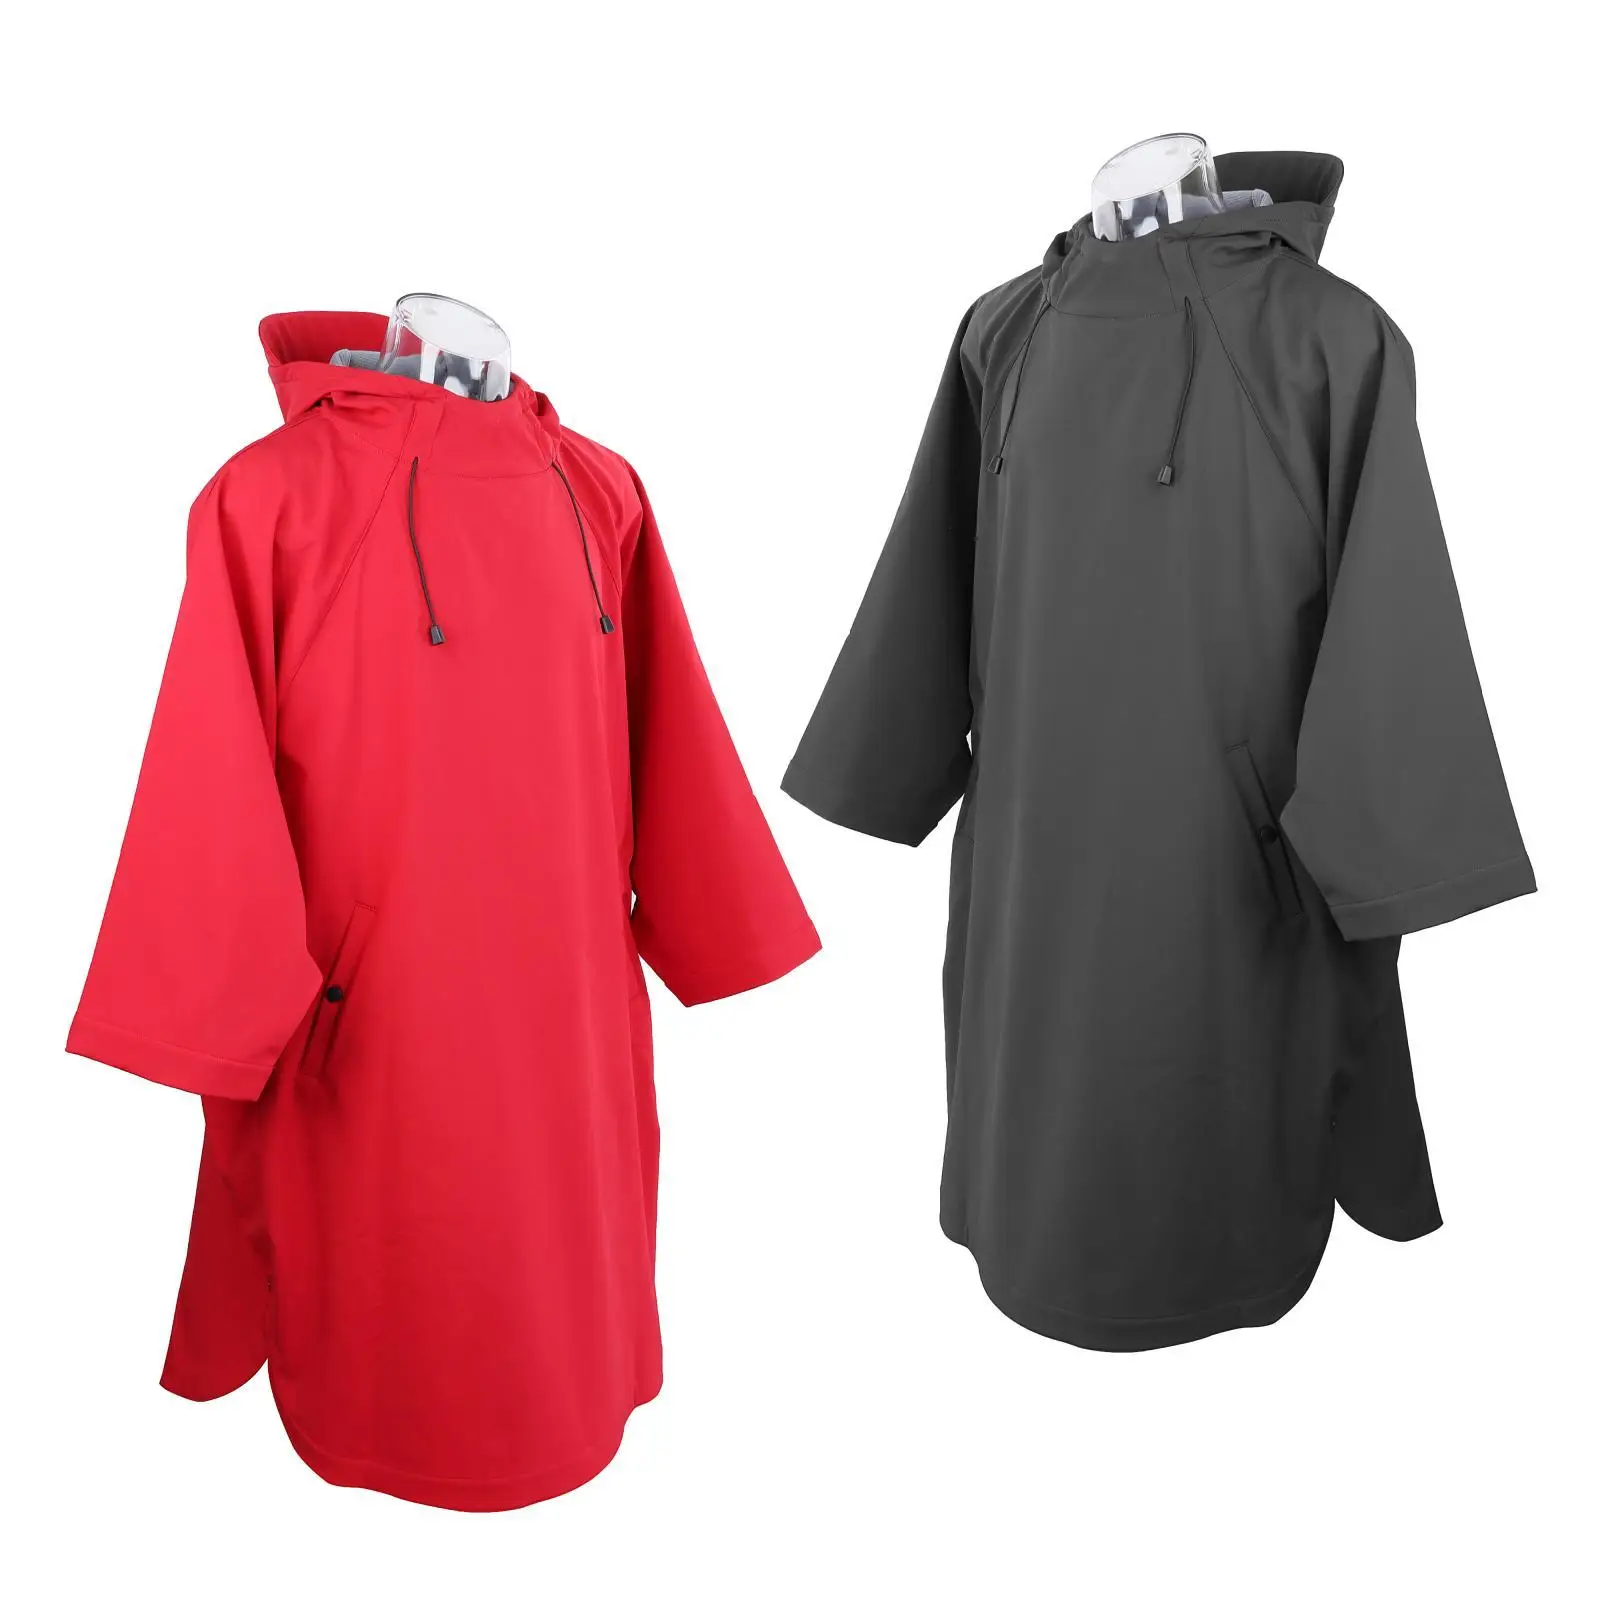 Beach Surfing Changing Robe Jacket Thermal Warm Overcoat Rain Coat Women`s Men`s Sports Poncho Cape Suit